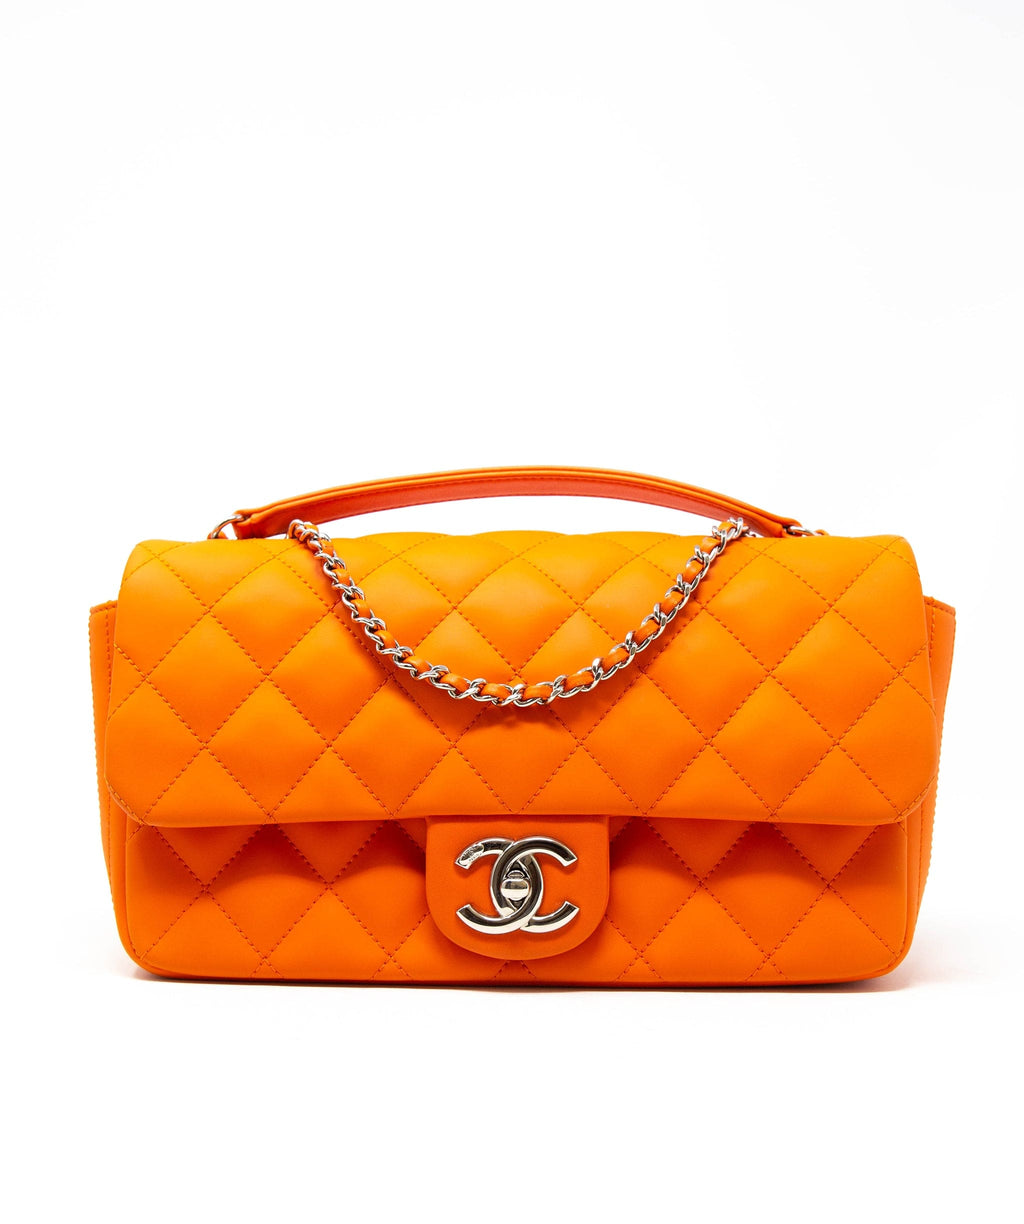 CHANEL PreOwned x Pharrell Williams toweleffect Tote Bag  Farfetch